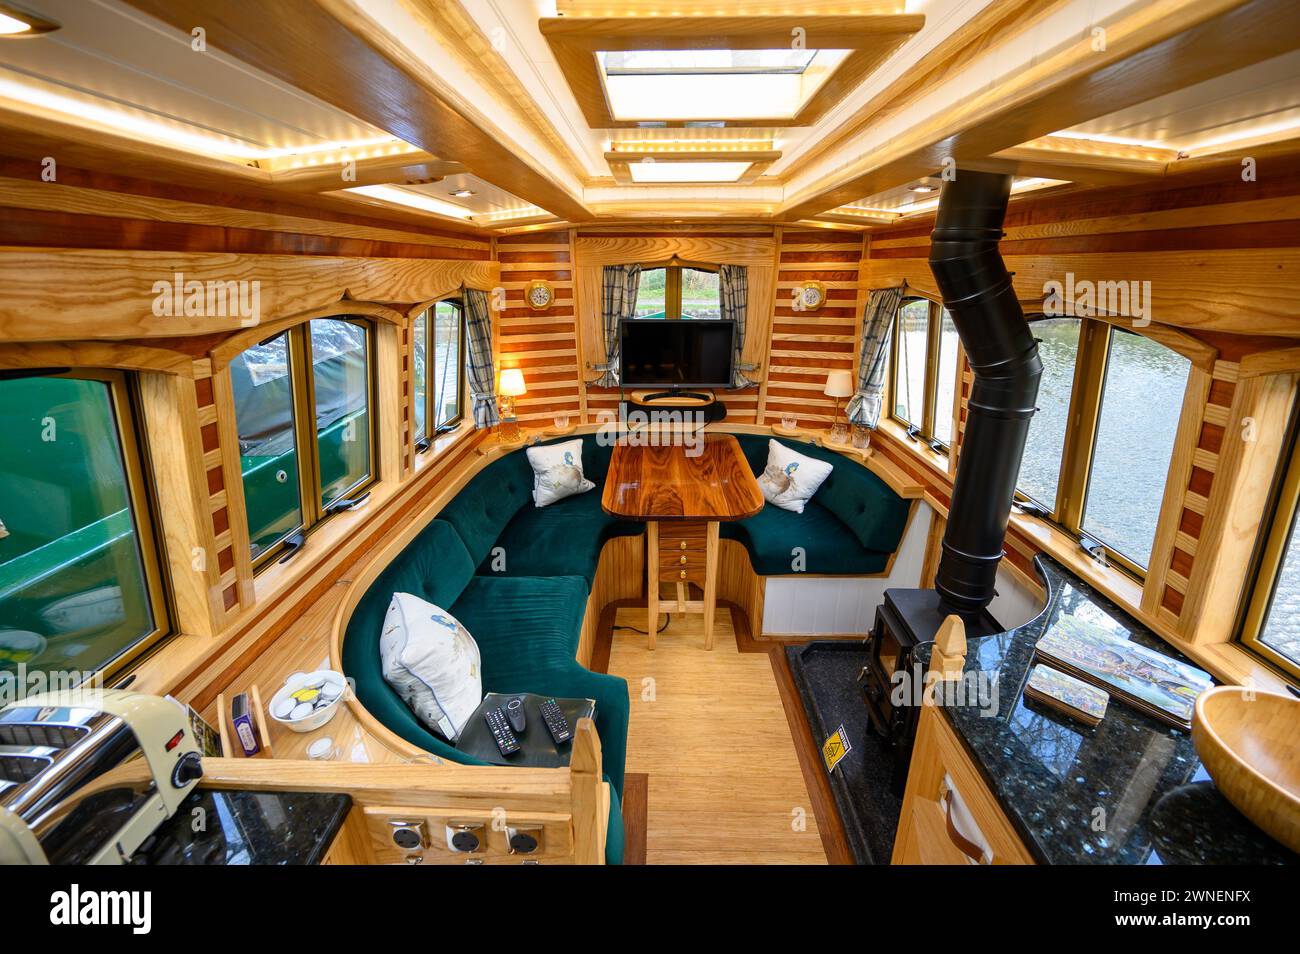 Eye catching interior of a holiday hire narrowboat with modern fixtures and fittings and distinictive wood patterns on the walls Stock Photo